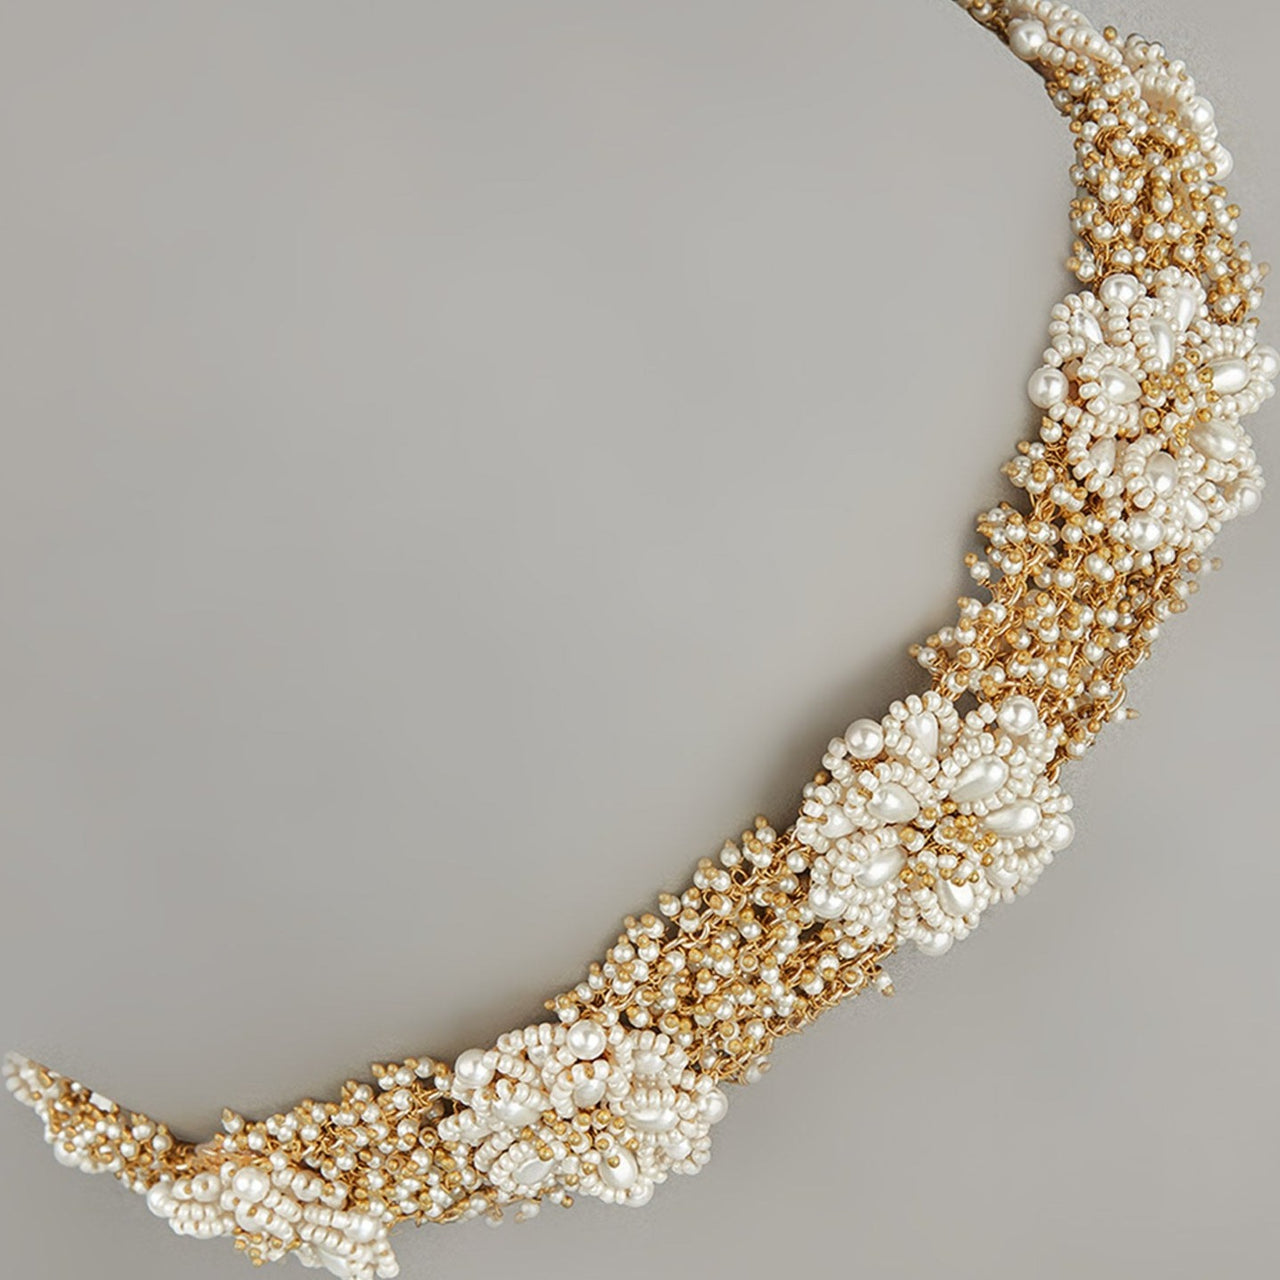 Fancy Headband with Pearls And Golden Beads for women